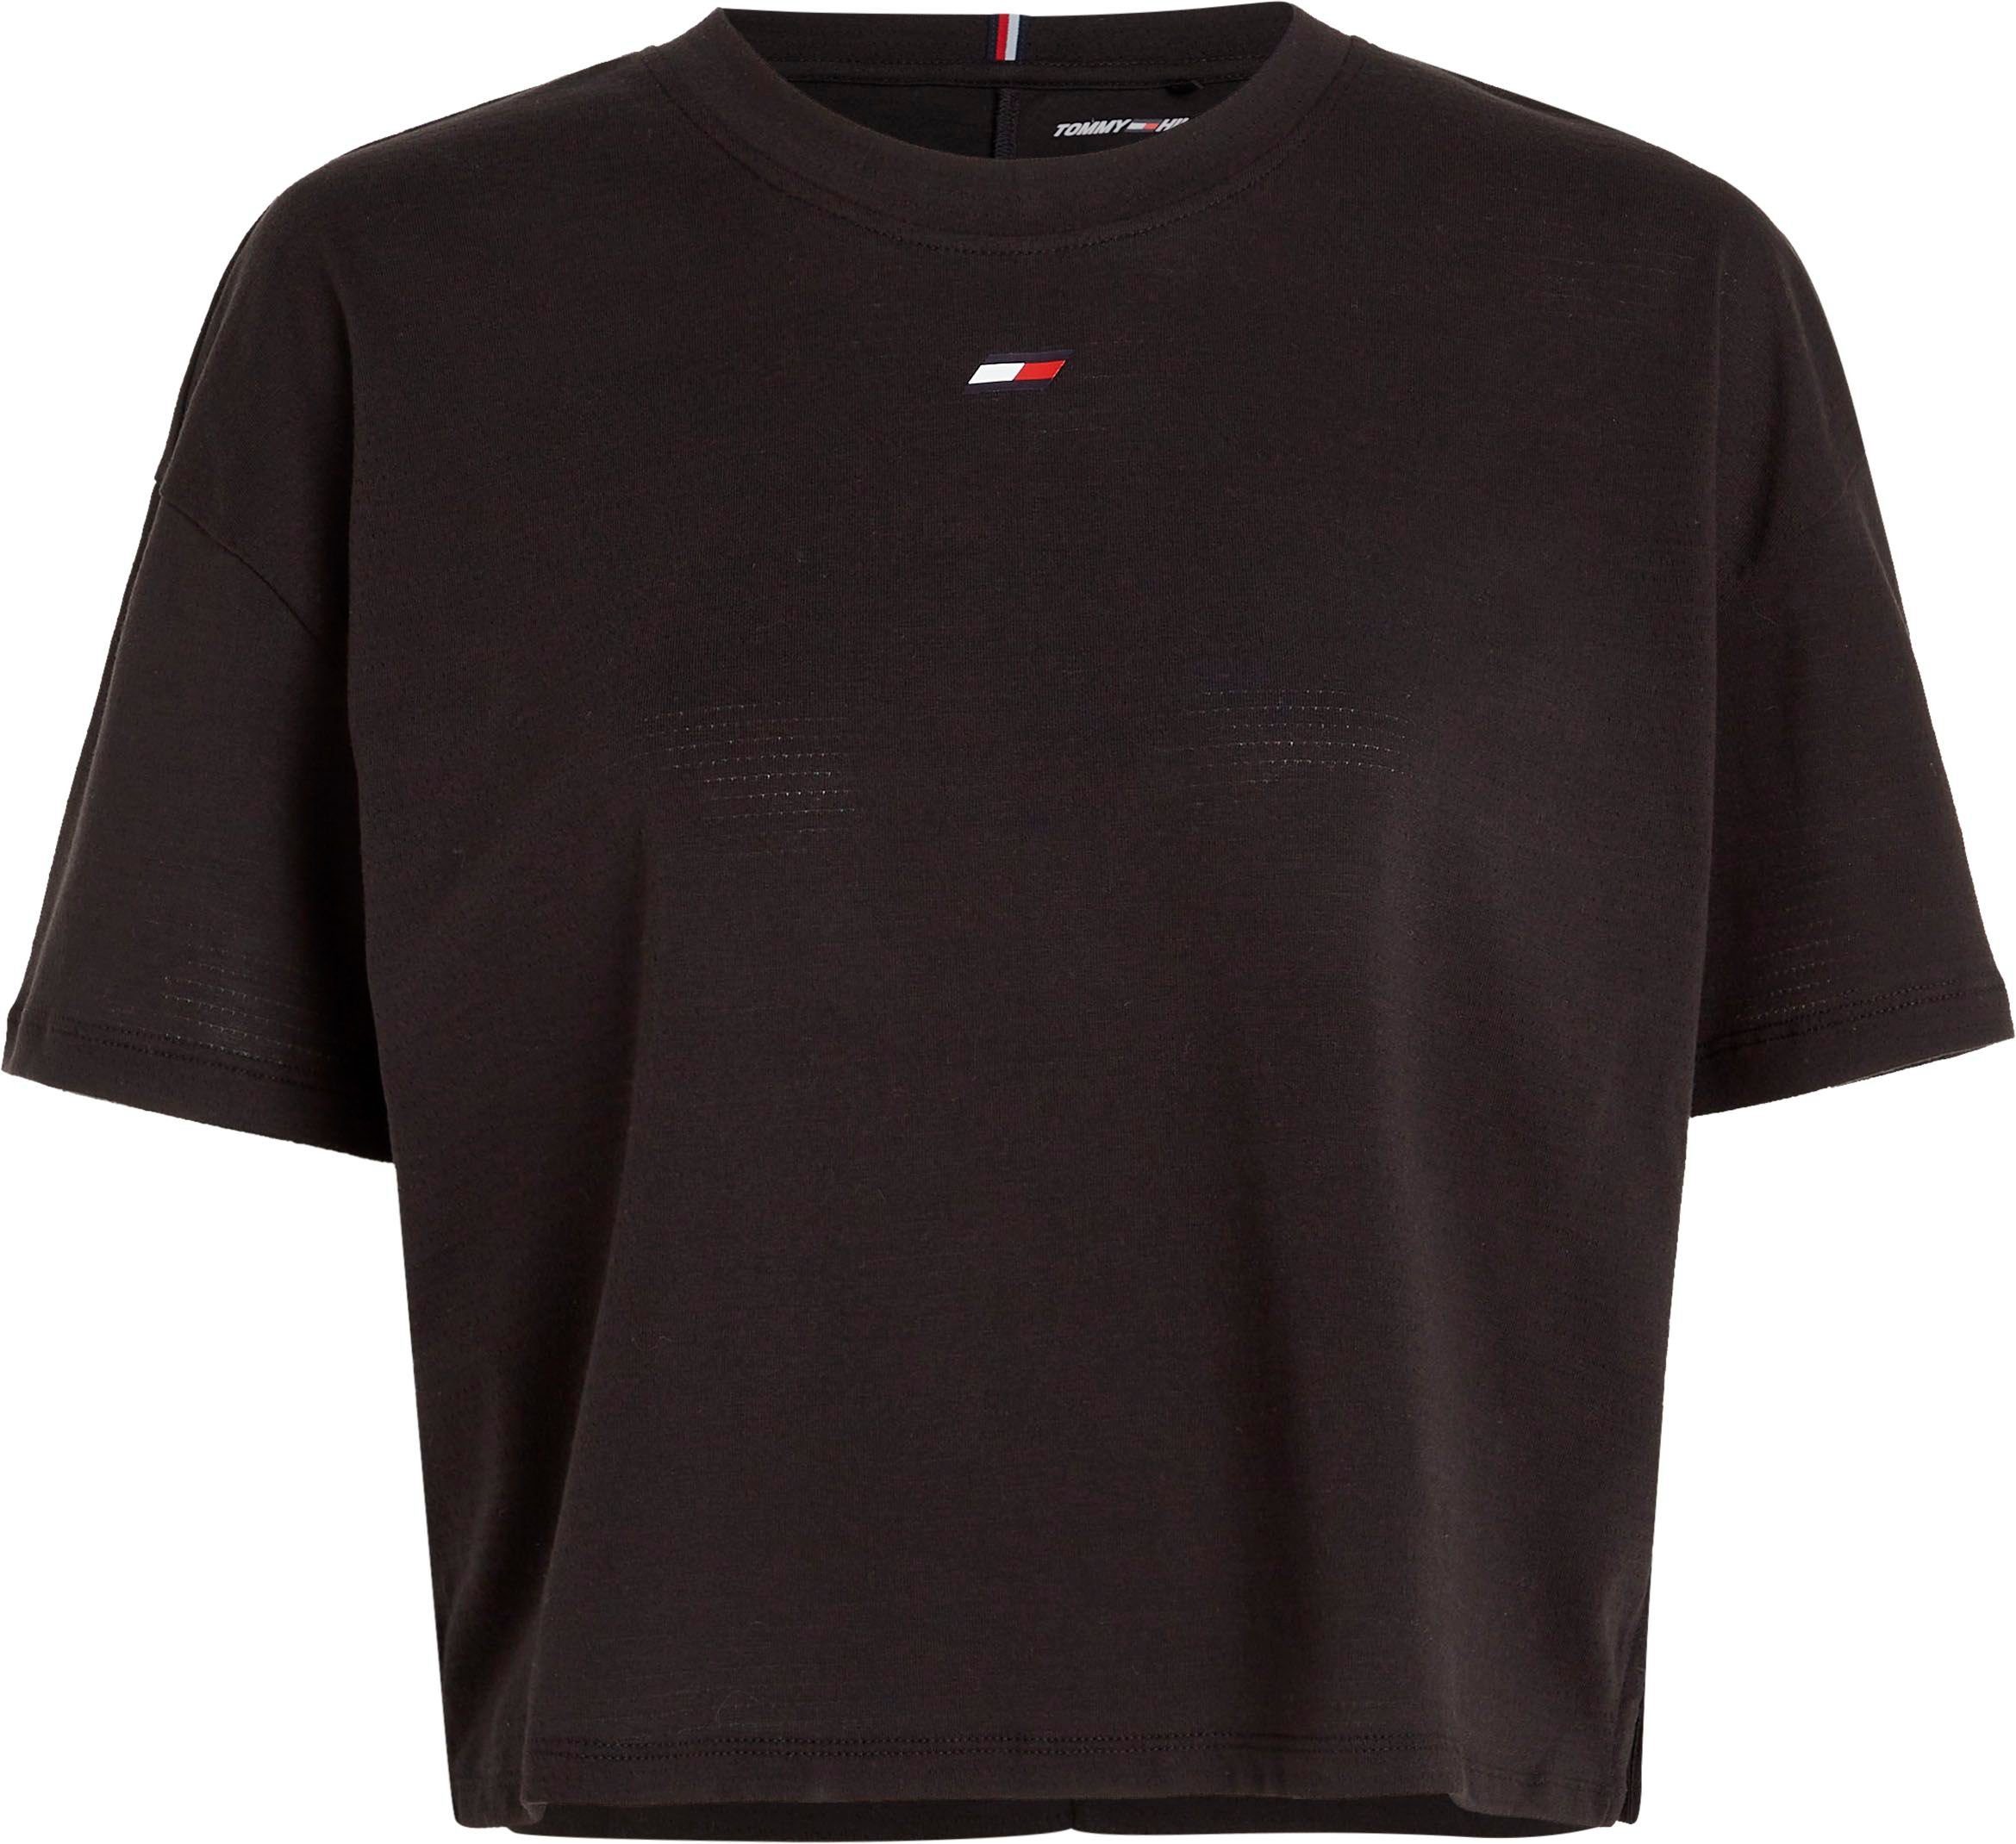 Tommy Hilfiger CROPPED Form TEE in cropped T-Shirt Black Sport ESSENTIALS modischer RELAXED